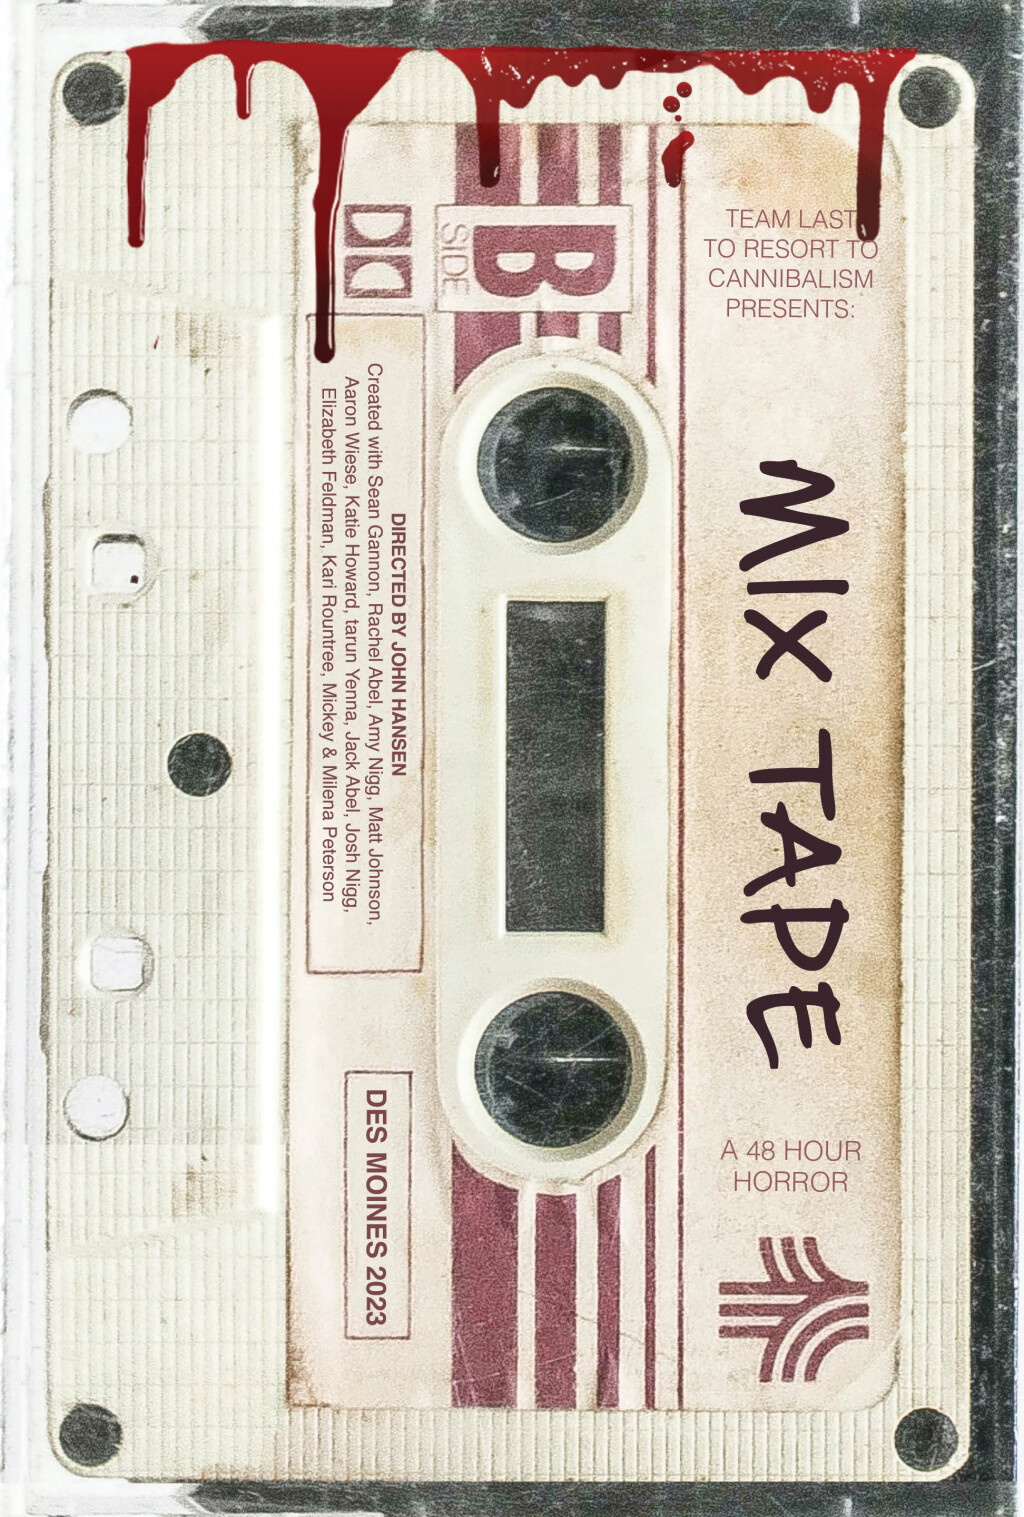 Filmposter for Mix Tape